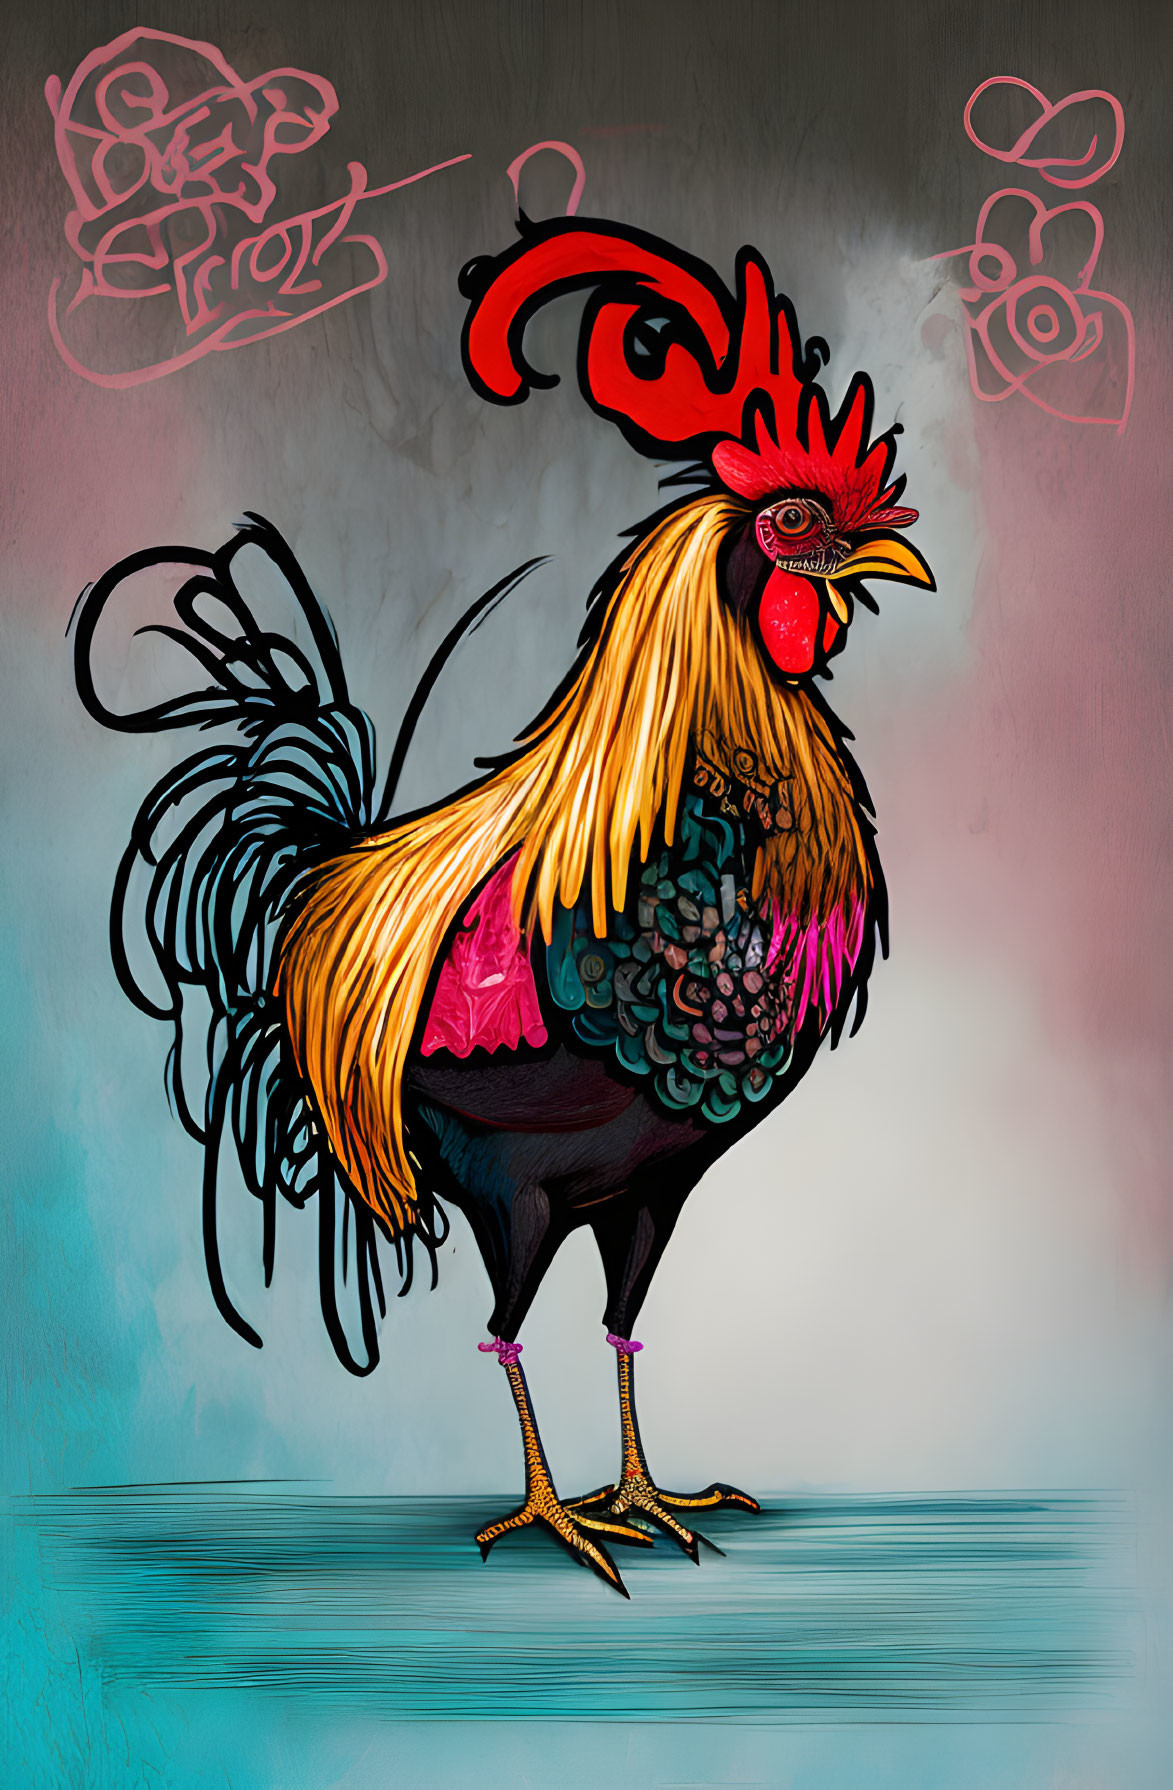 Colorful Rooster Digital Artwork with Graffiti Elements and Calligraphy